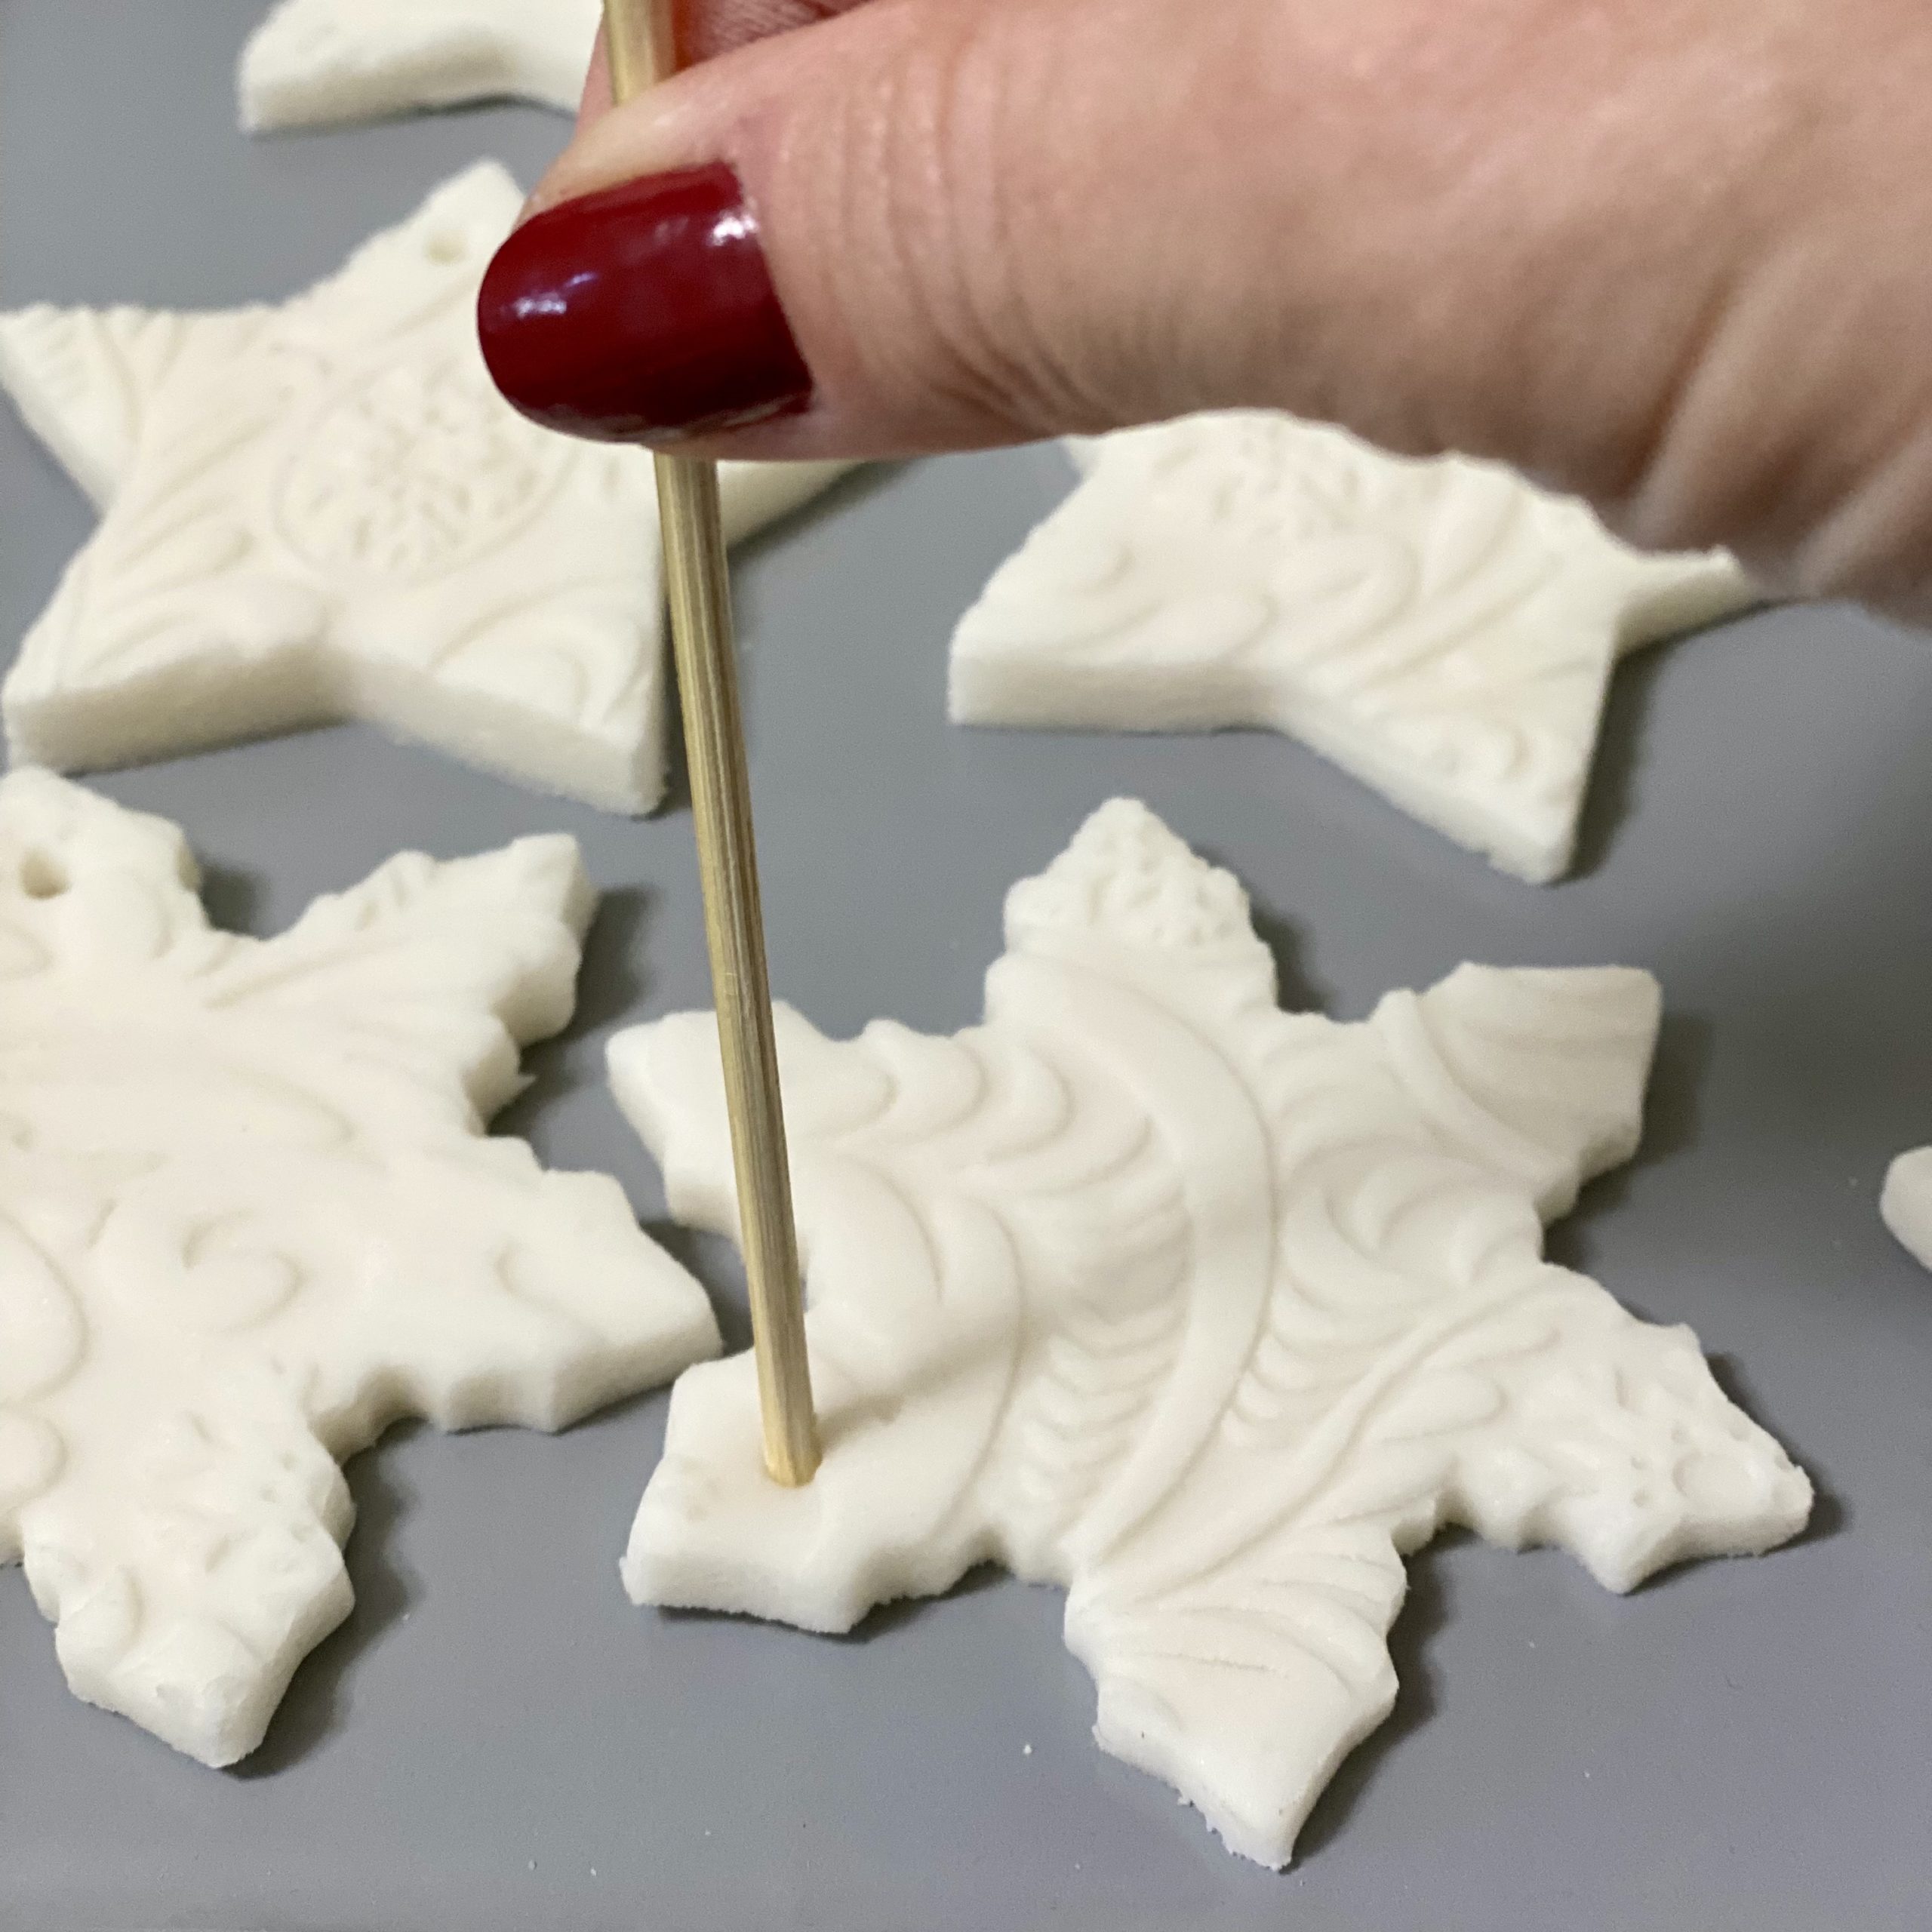 Making holes in baking soda dough Christmas ornaments with a bamboo skewer.